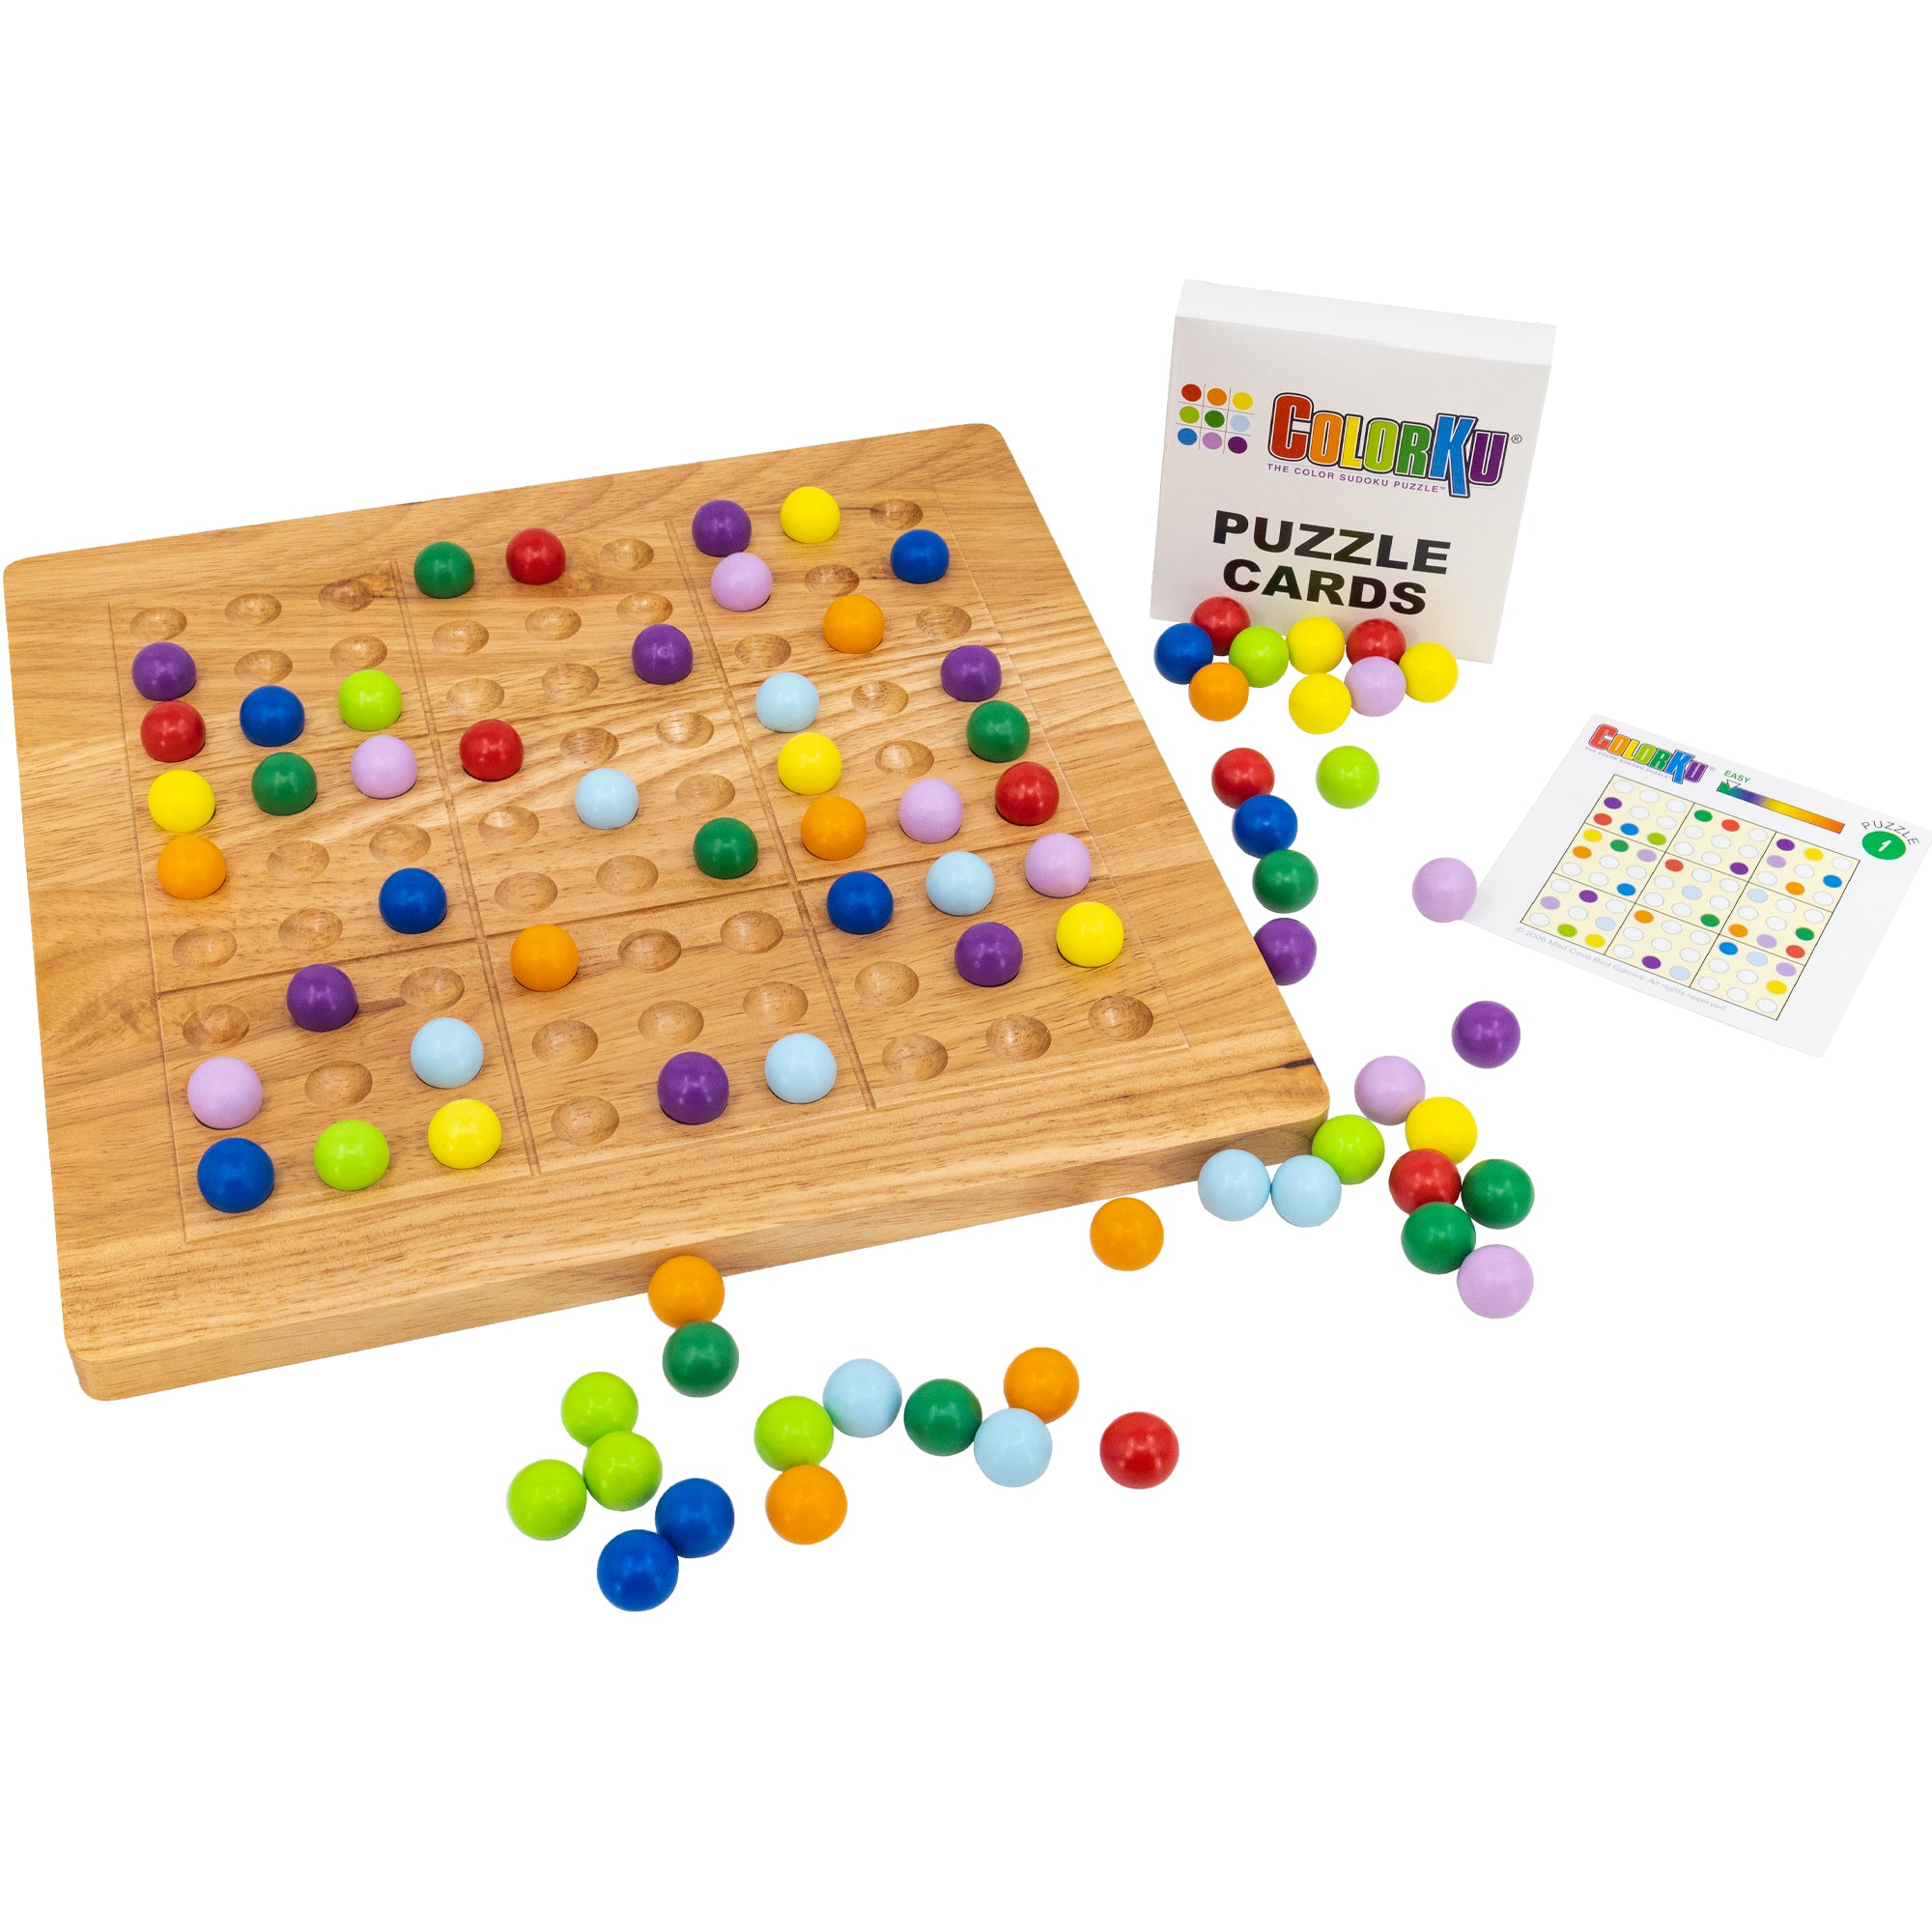 The wooden ColorKu board with several pieces in place on top. Off to the right is the card pack with 1 card laying off to the side. Spread all over the surface are many colored, wooden balls. The colored balls are red, orange, yellow, bright green, dark green, light blue, dark blue, light purple, and dark purple.